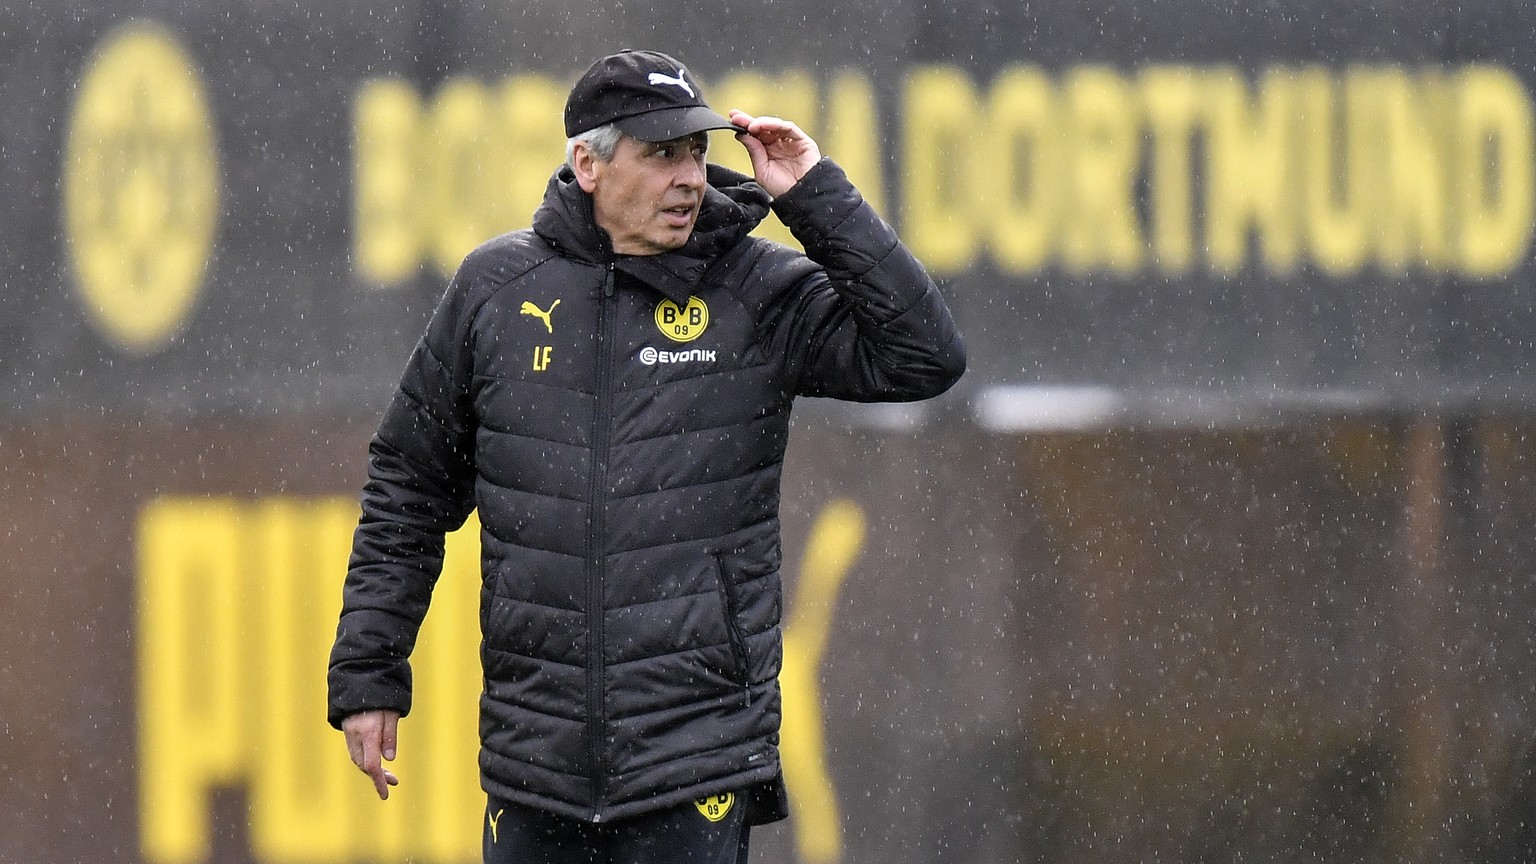 Dortmund&#039;s head coach Lucien Favre arrives in the rain during a training session in Dortmund, Germany, Monday, Nov. 4, 2019. Borussia Dortmund plays Inter Milan in a Champions League Group F socc ...